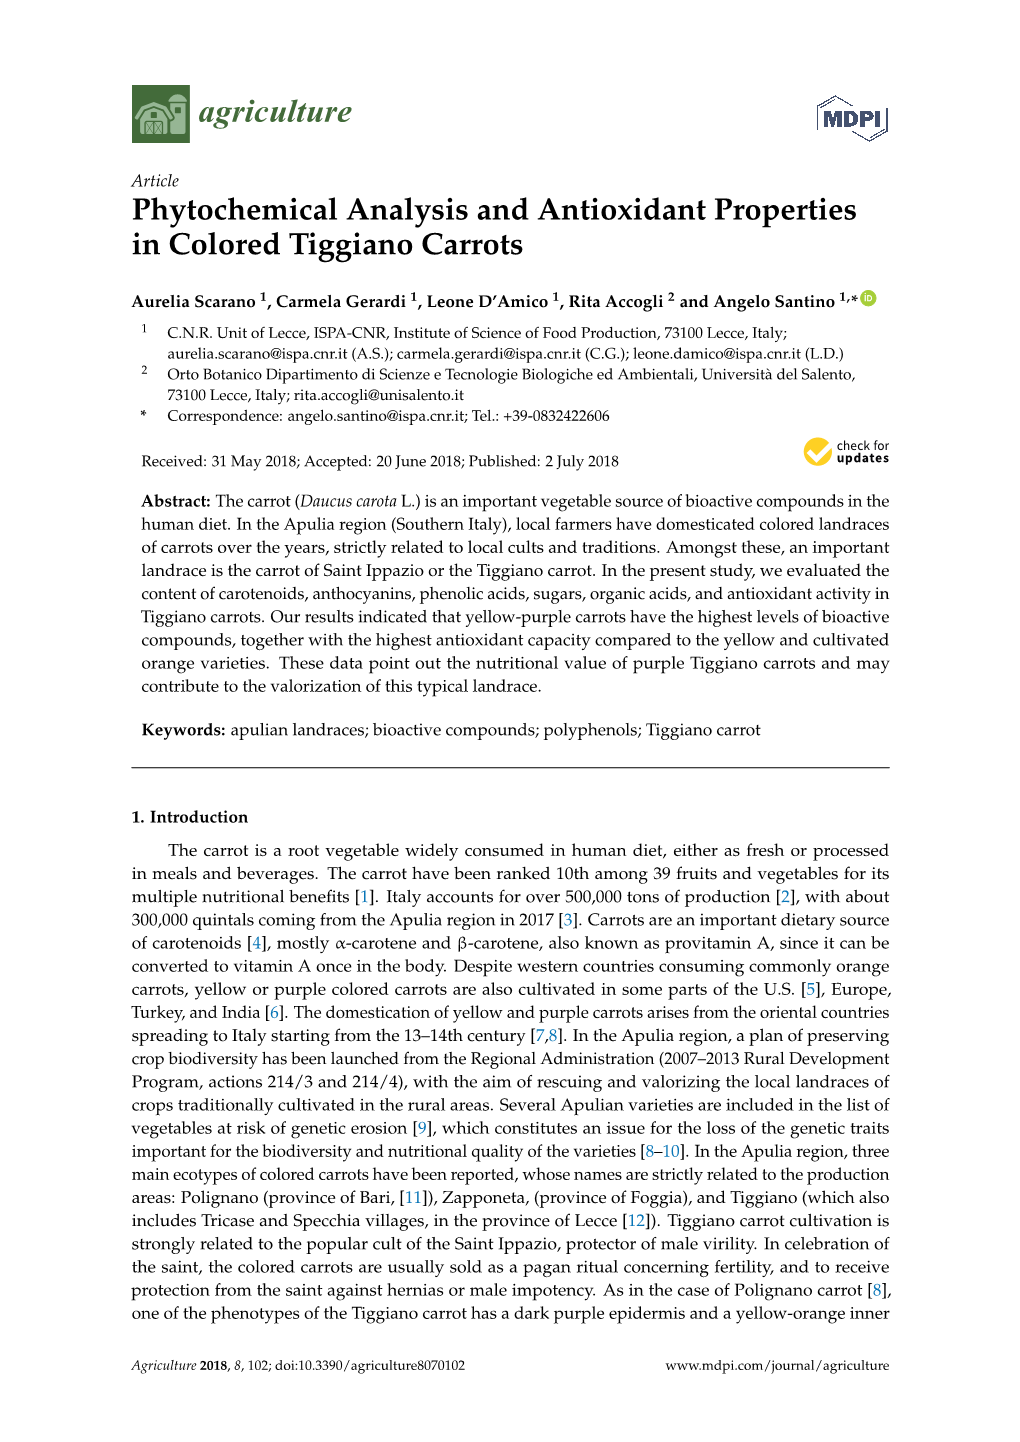 Phytochemical Analysis and Antioxidant Properties in Colored Tiggiano Carrots